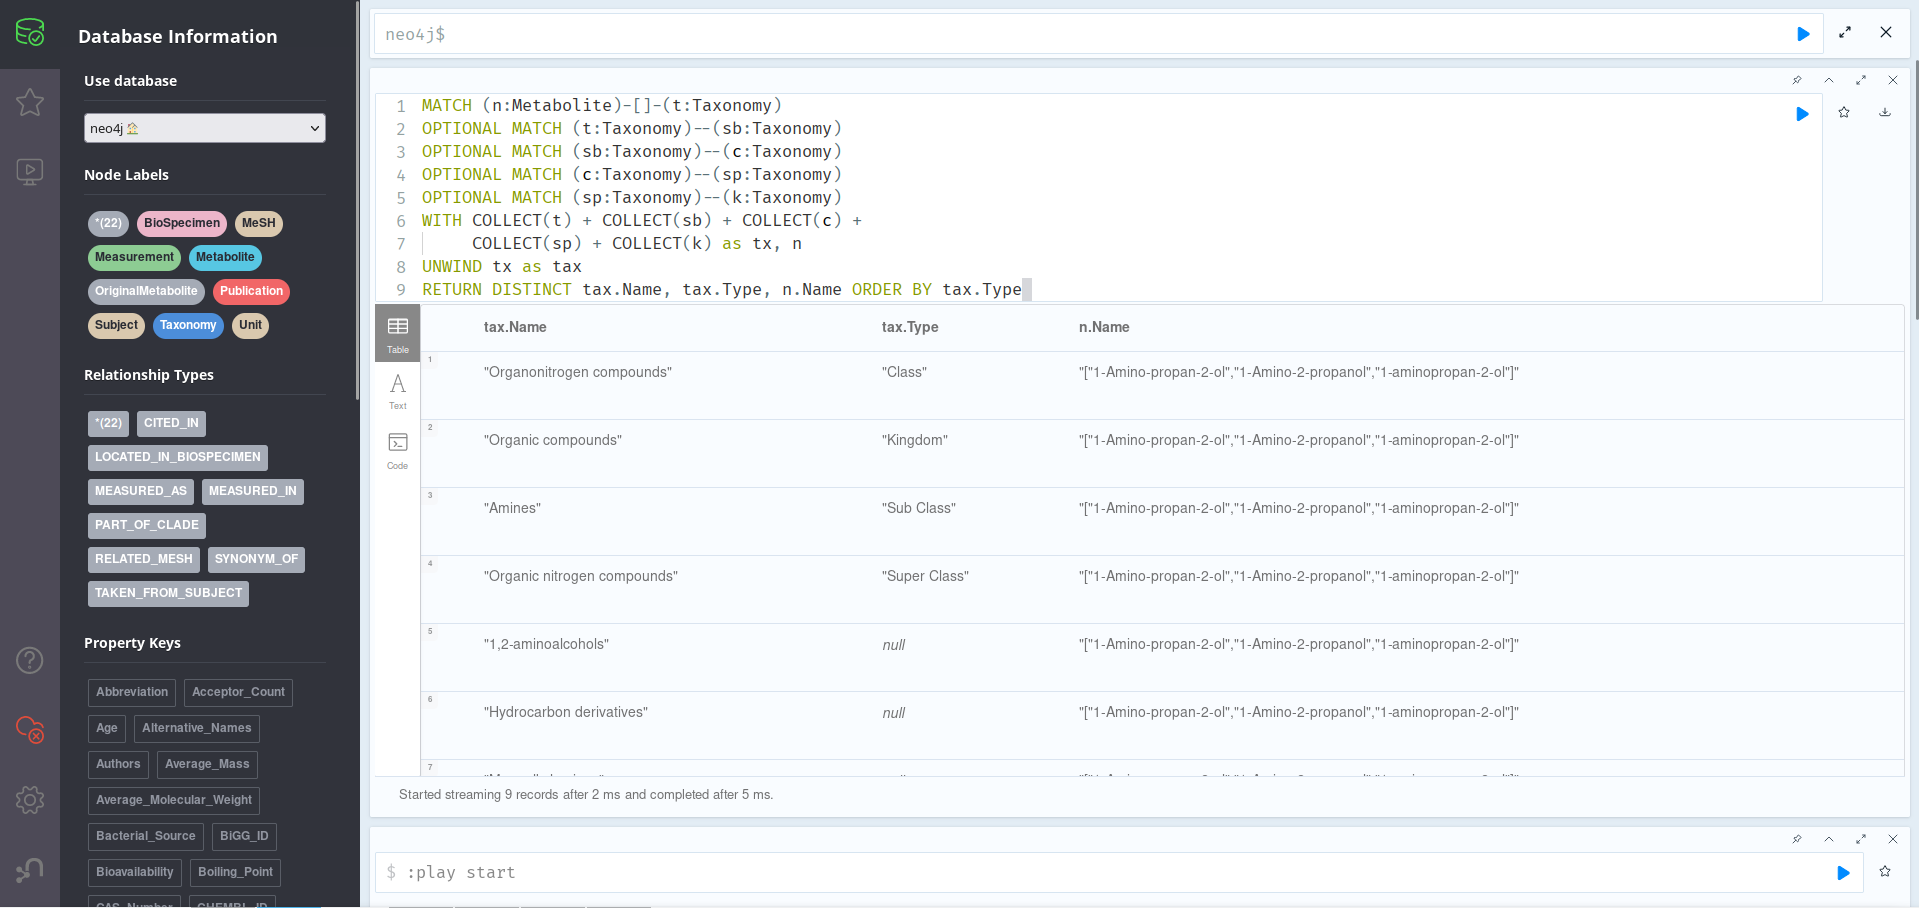 Neo4J Browser showing information on Taxonomies for 1-Amino-2-propanol